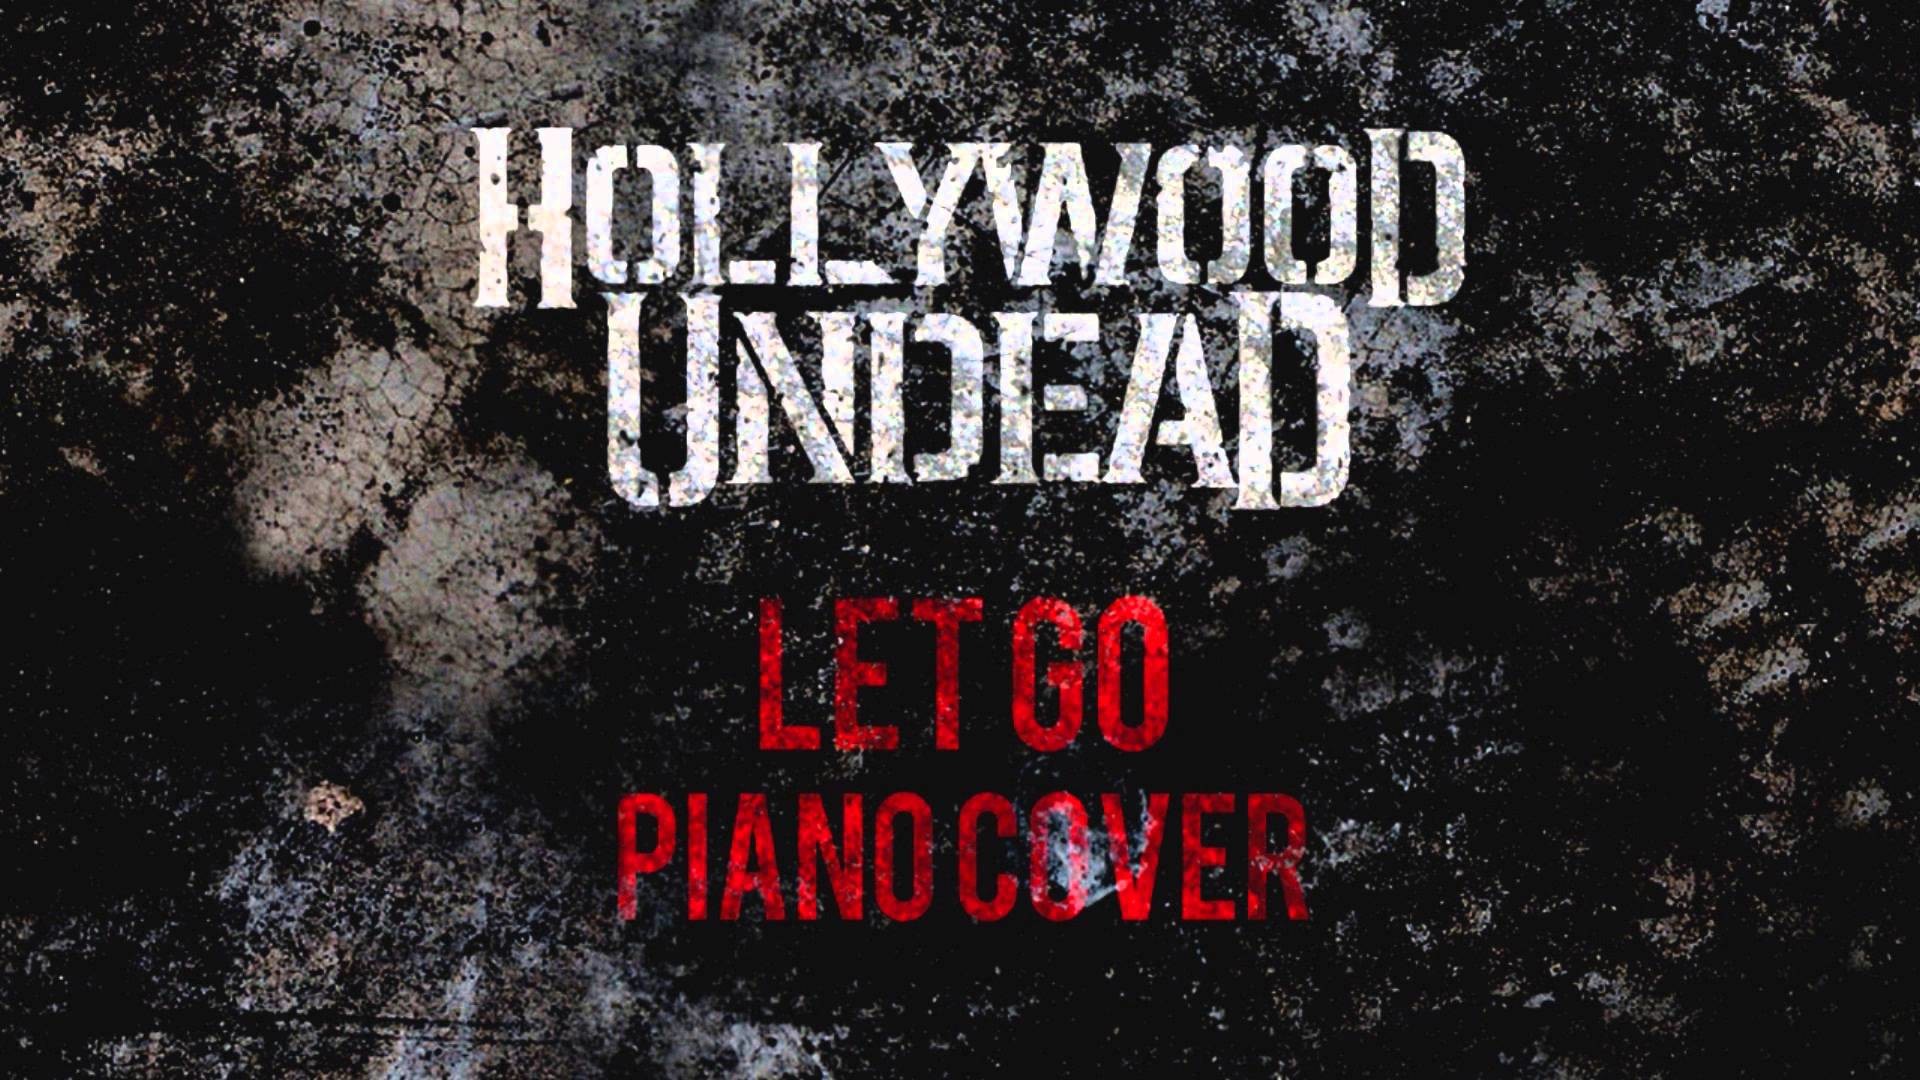 1920x1080 Hollywood Undead- Let Go (Piano Cover)